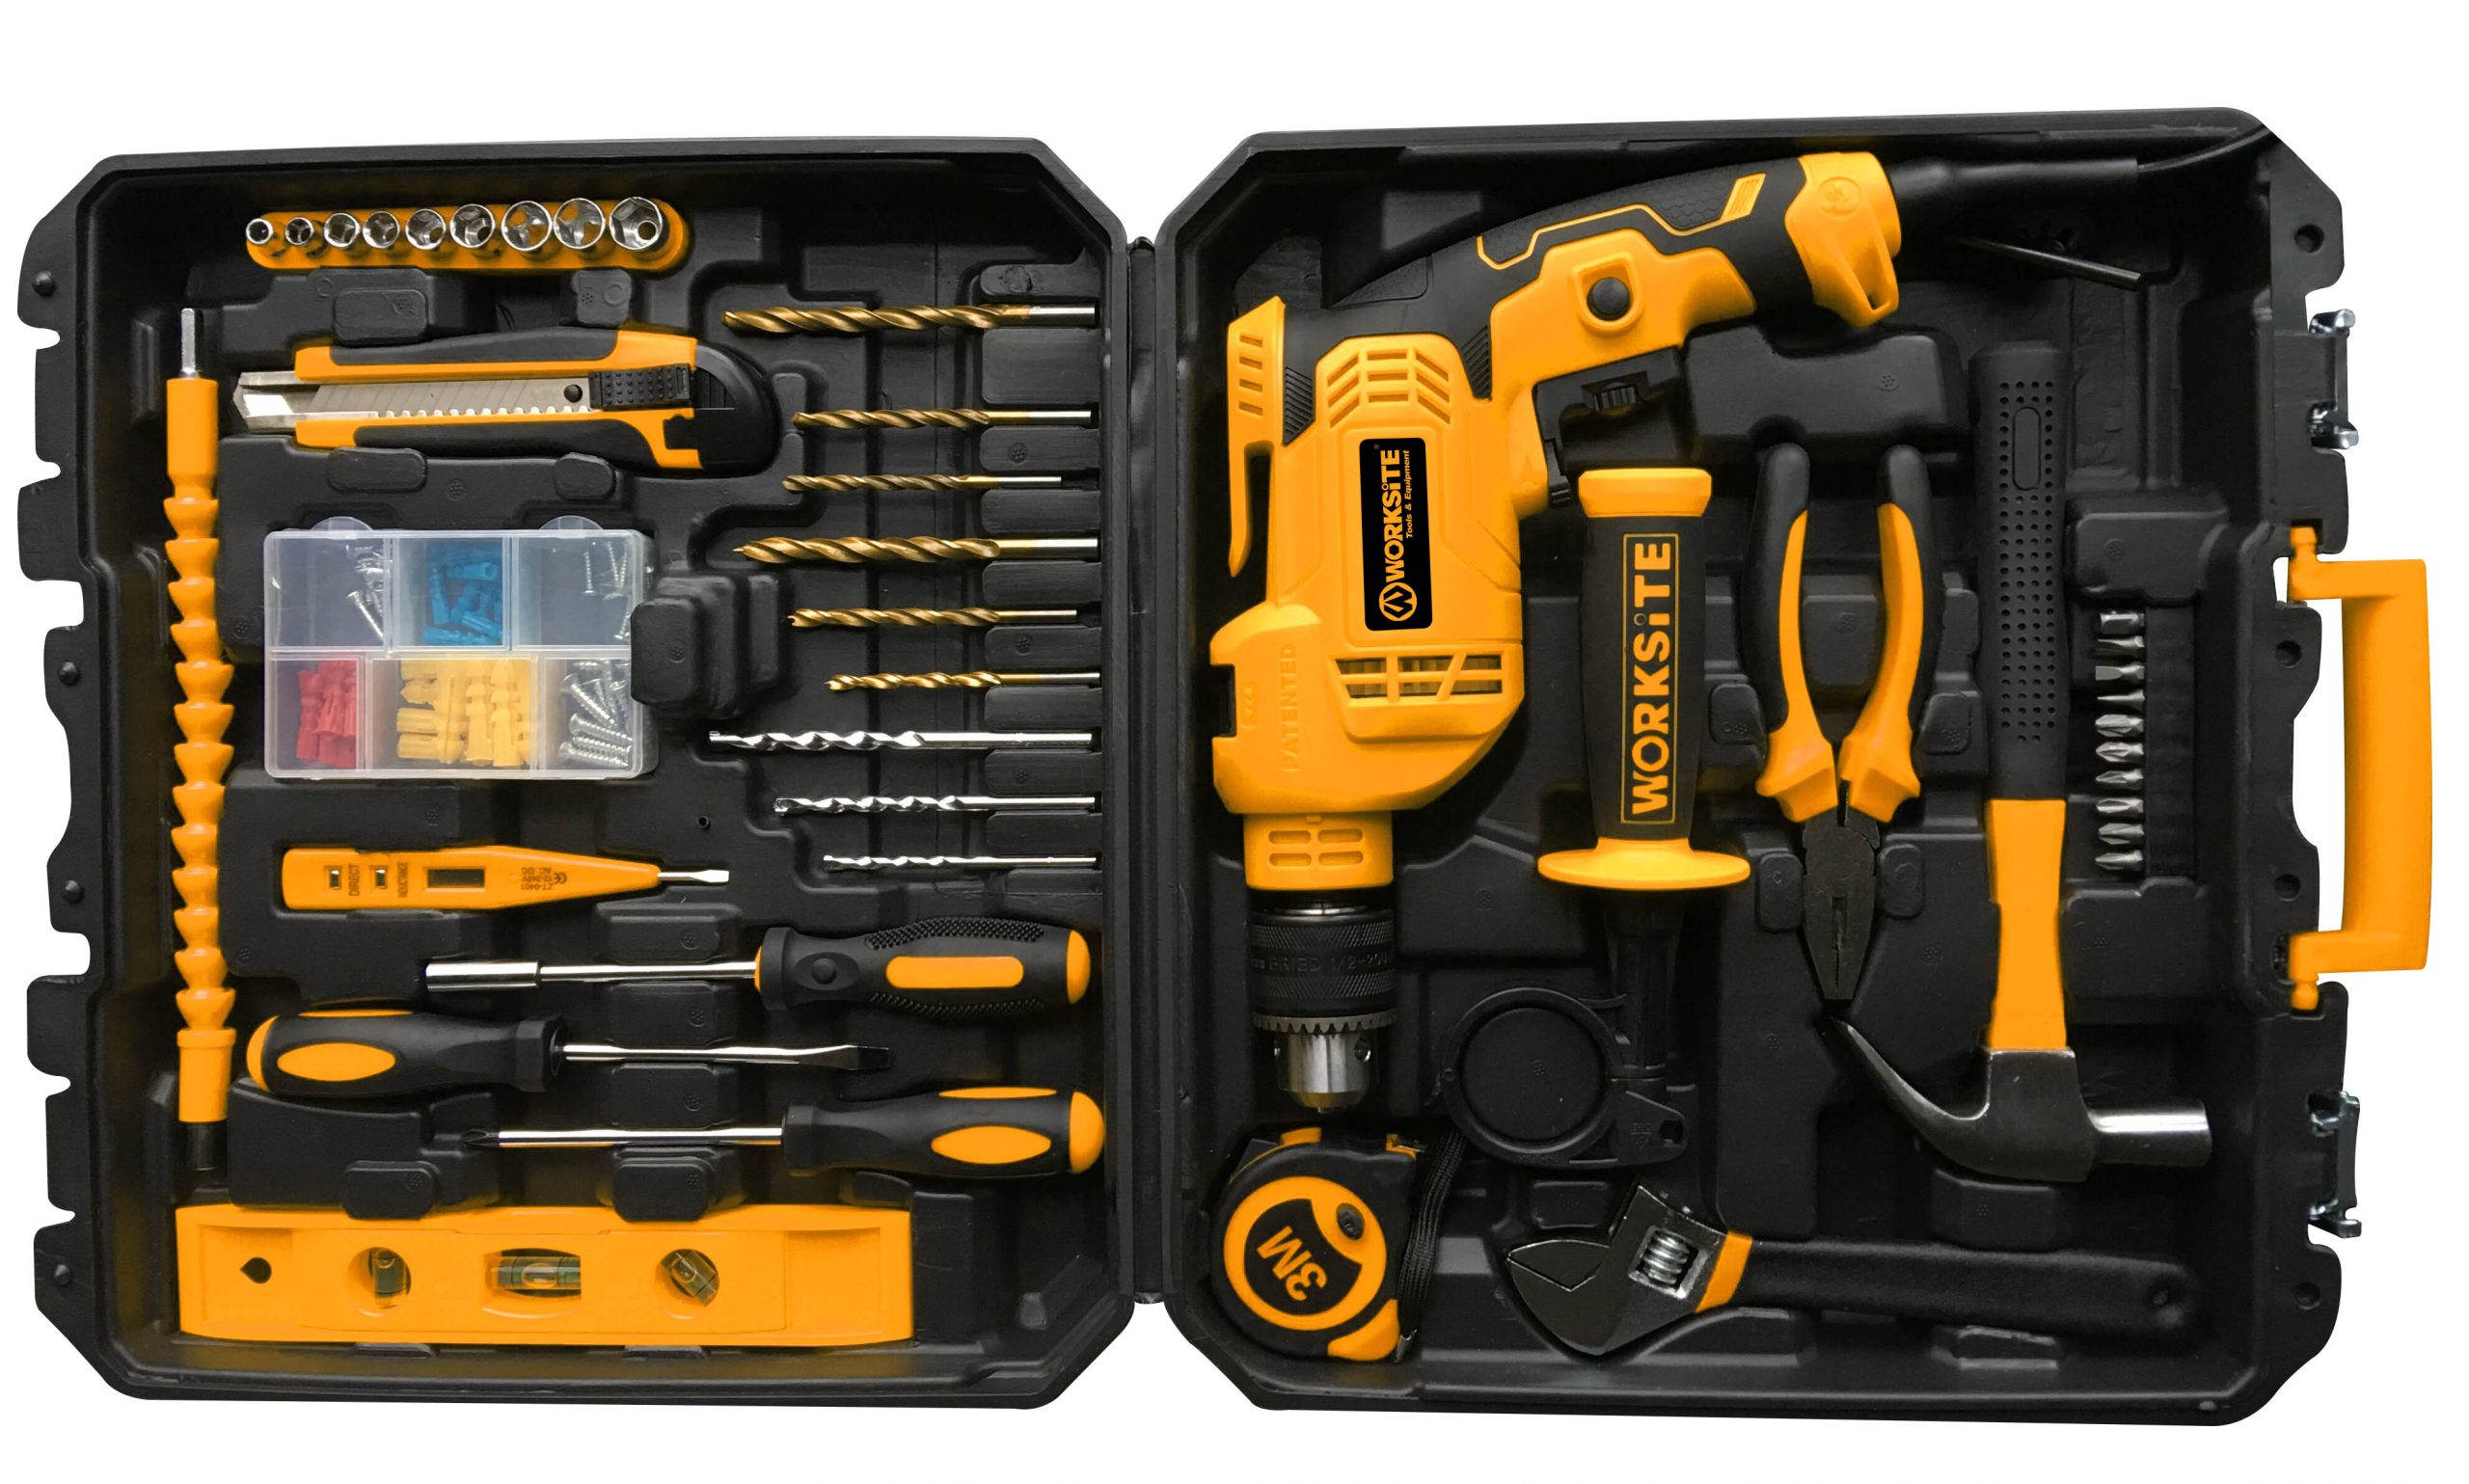 Worksite Impact Drill 102 Pcs Kit Chuck Size 13mm(1/2inch), 650W Impact Drill, Adjustable speed, Reversible, EID448-KIT-110V